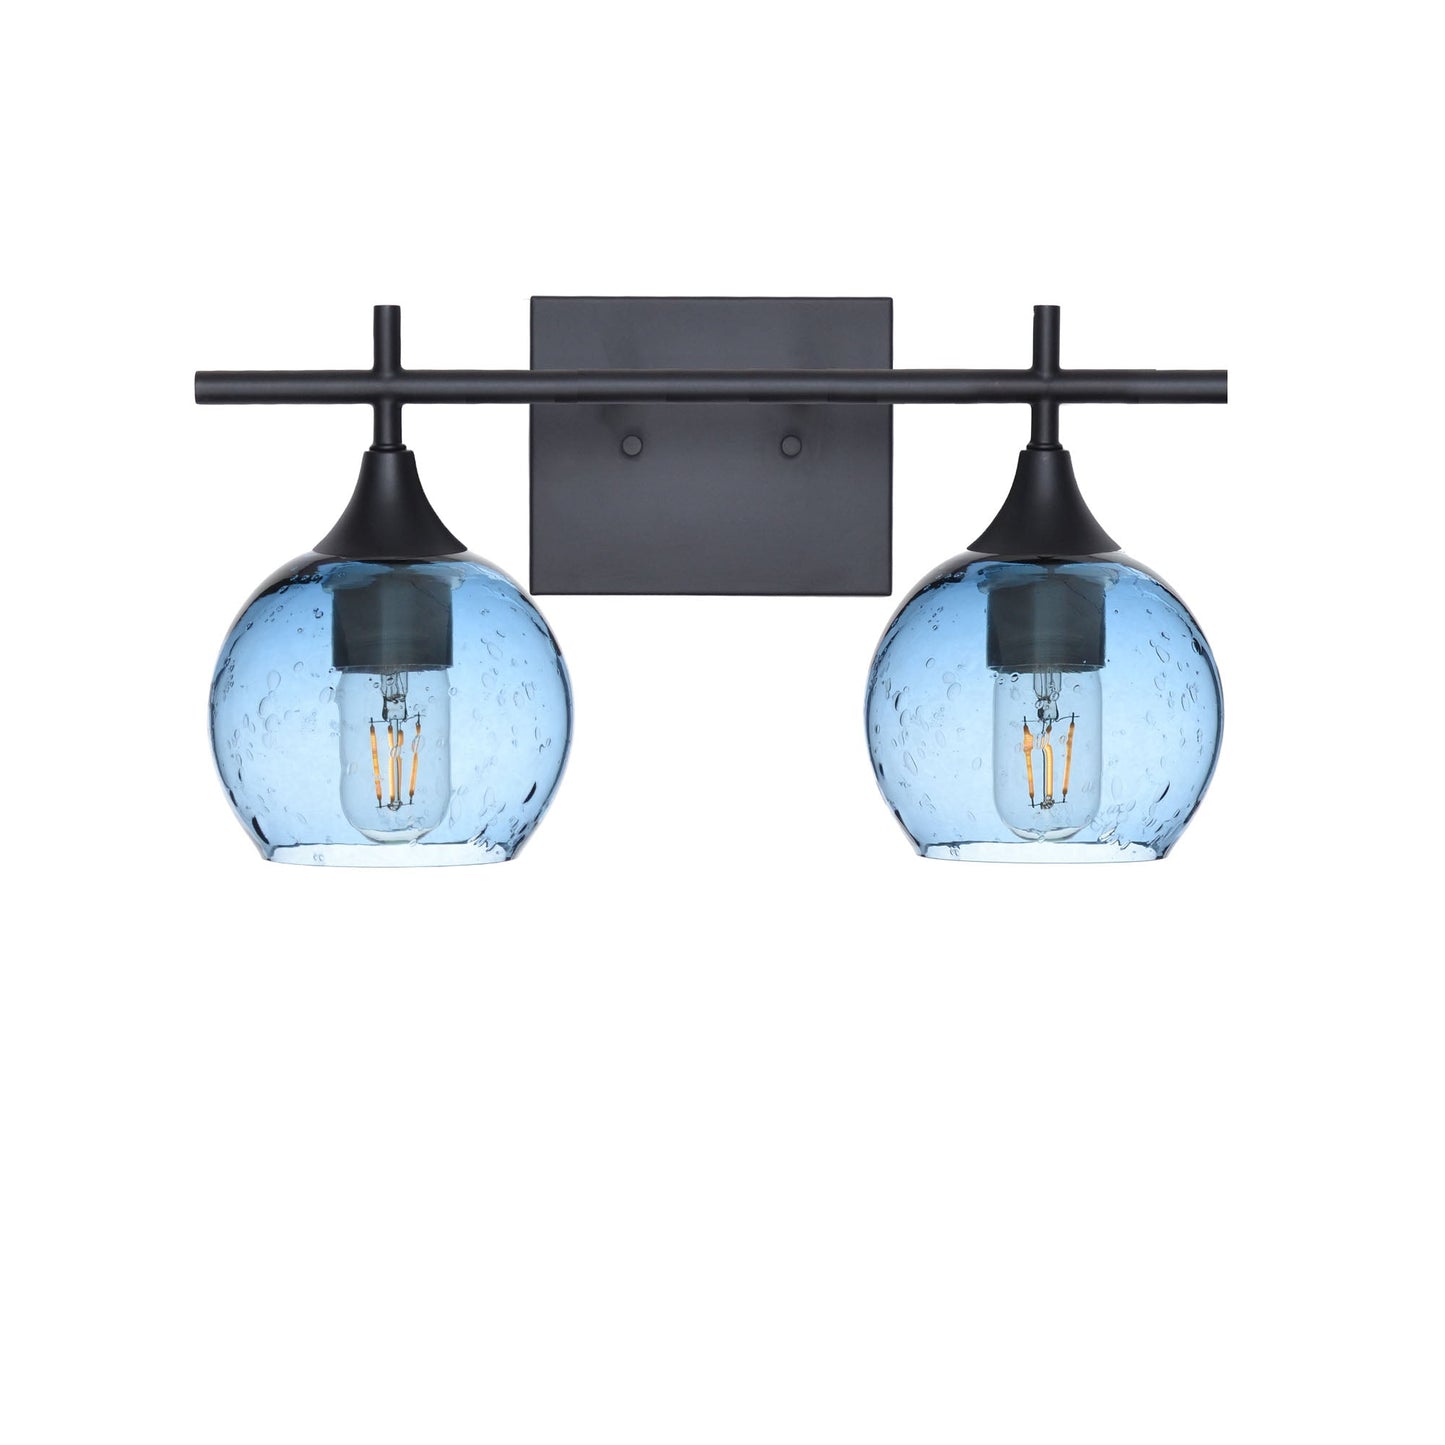 763 Lunar: 2 Light Wall Vanity-Glass-Bicycle Glass Co - Hotshop-Steel Blue-Matte Black-Bicycle Glass Co